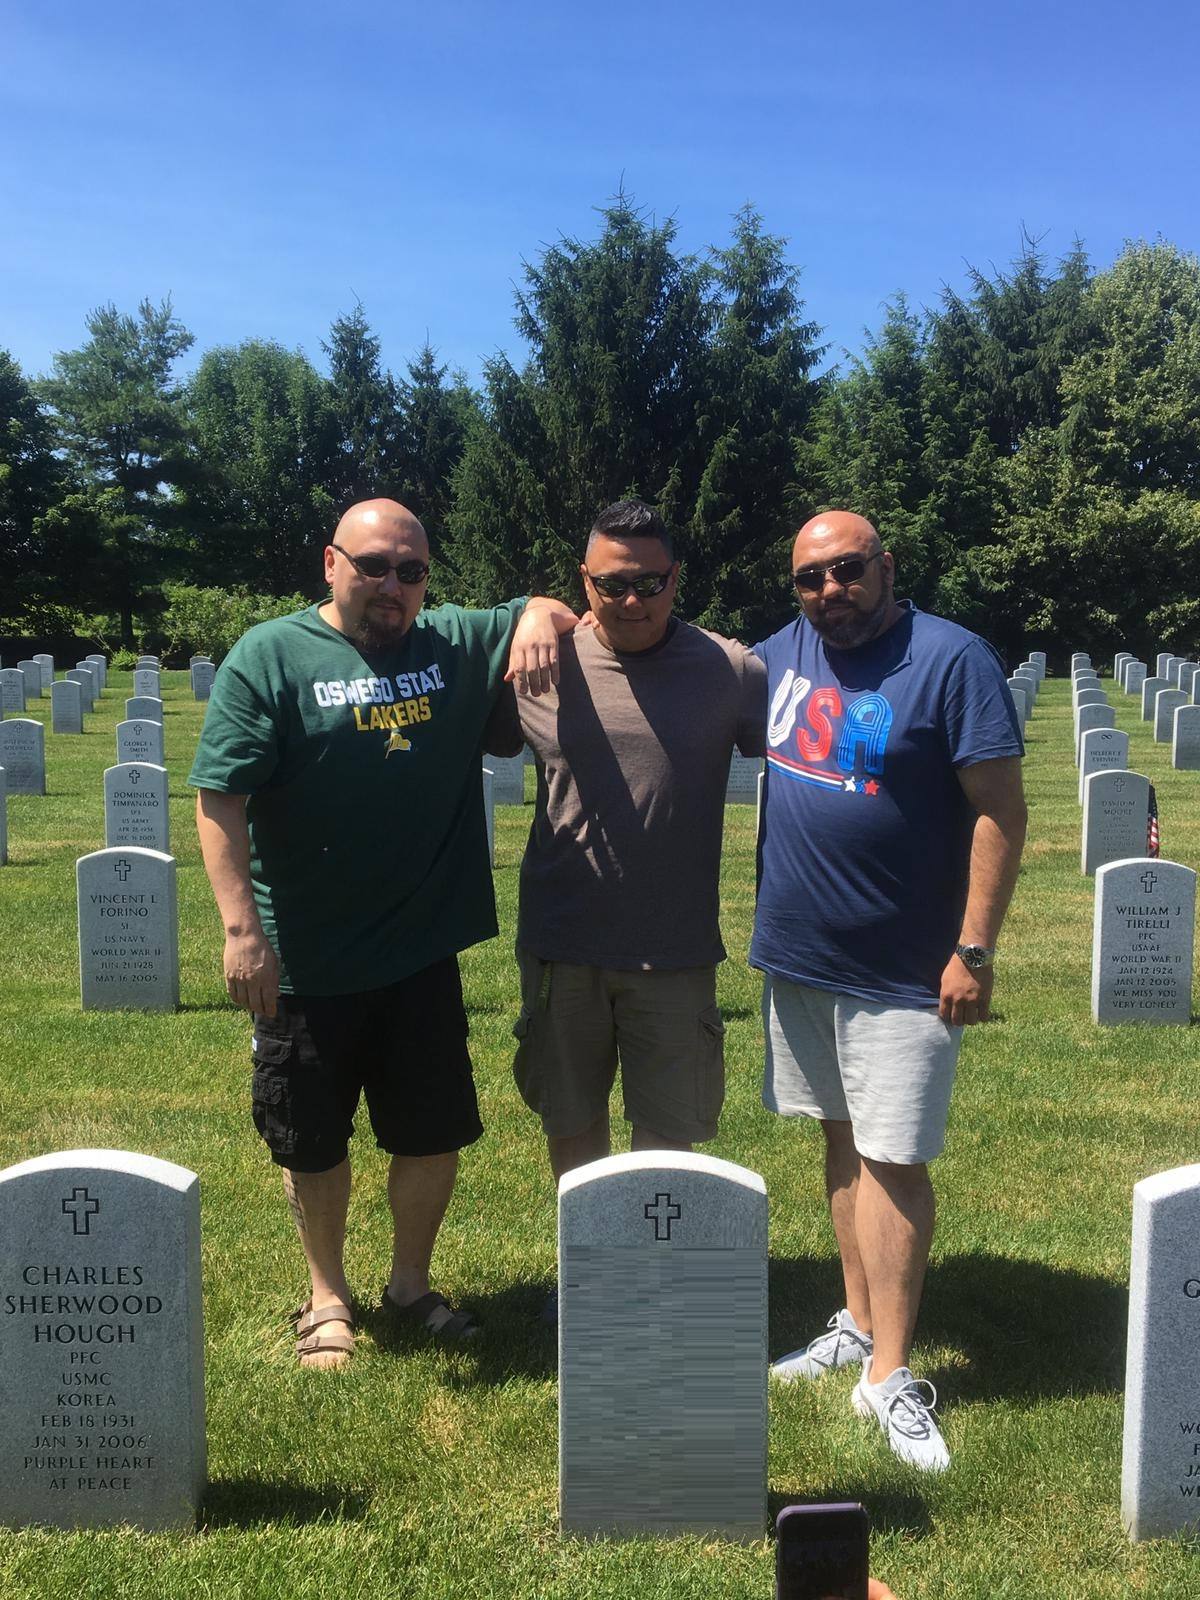 Johannes and his biological brothers visit their father’s grave together